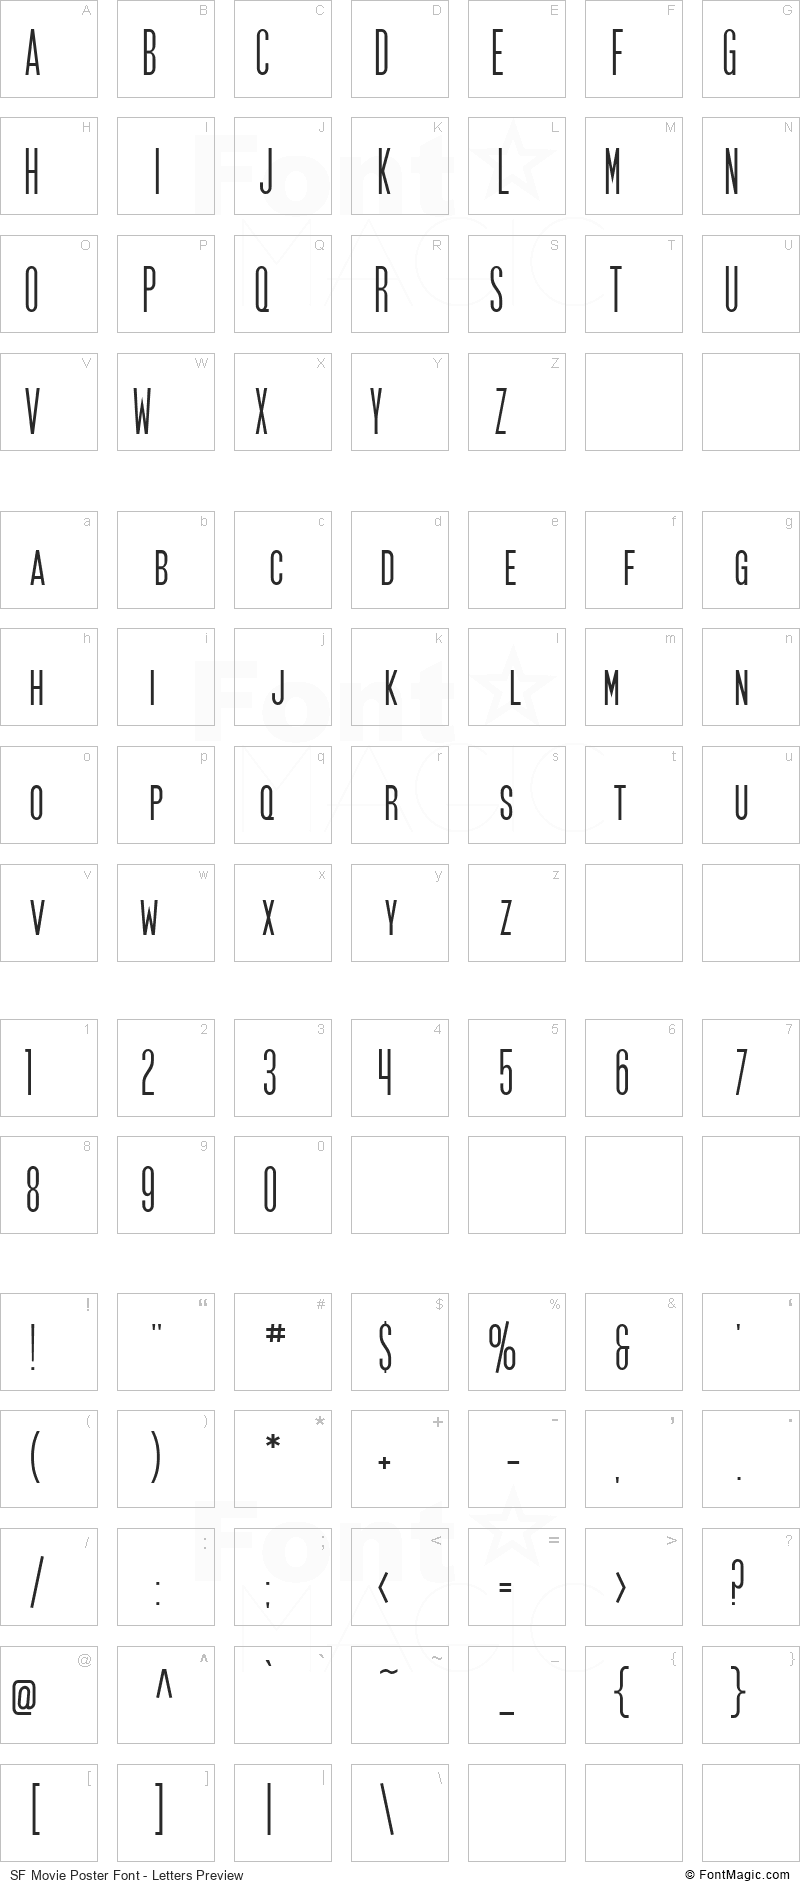 SF Movie Poster Font - All Latters Preview Chart